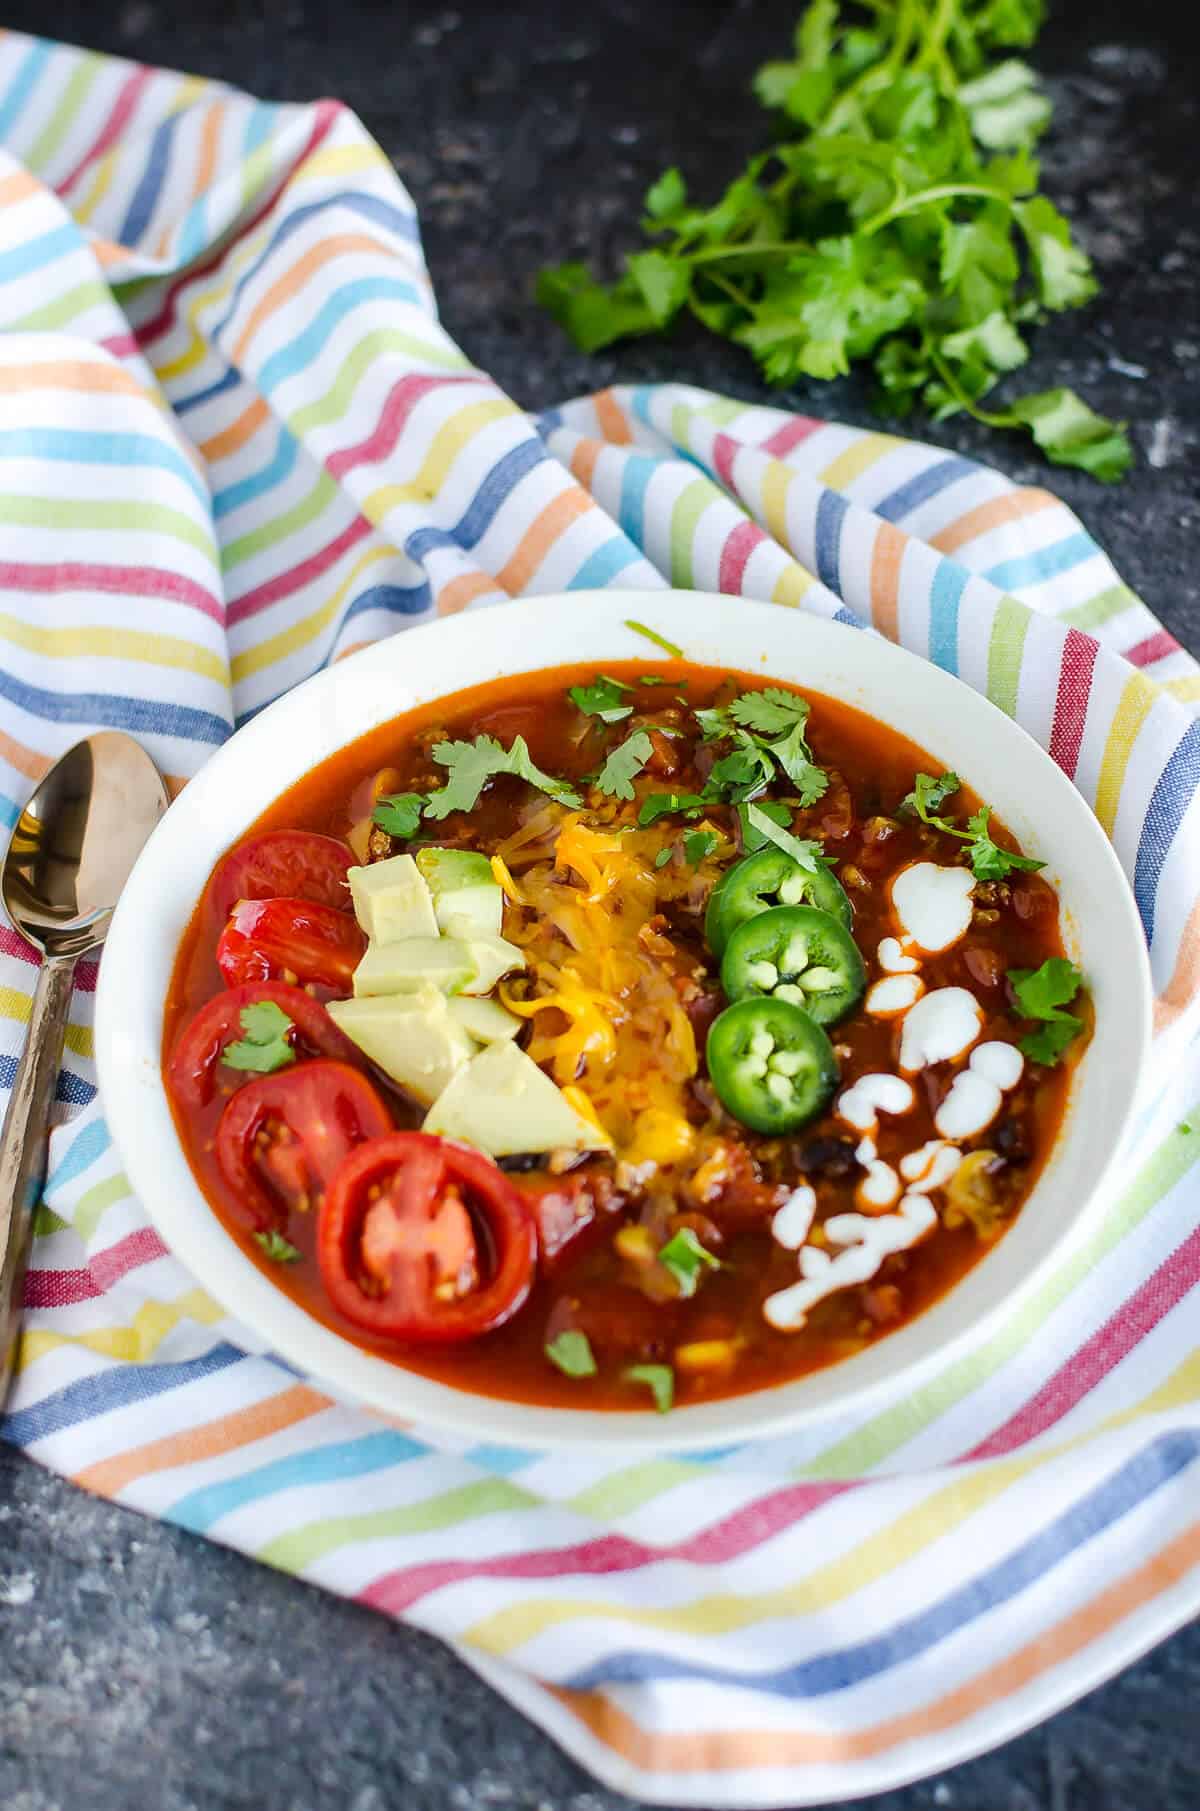 Bowl of taco soup garnished with sliced cherry tomatoes, avocados, cheese, jalapeños, and yogurt